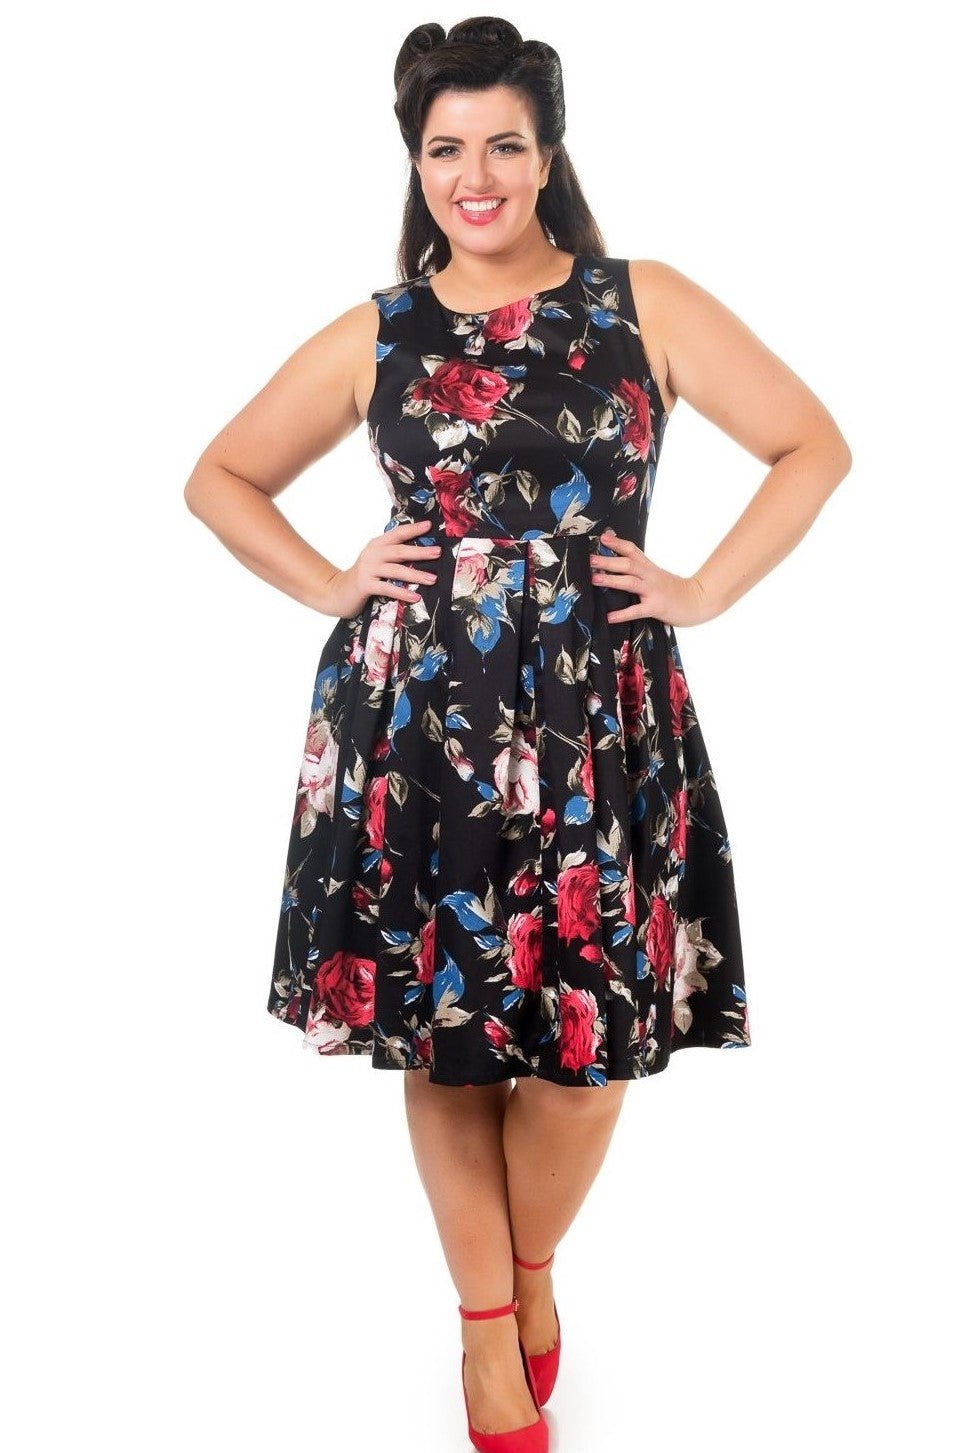 Model wearing our Annie dress in black floral print